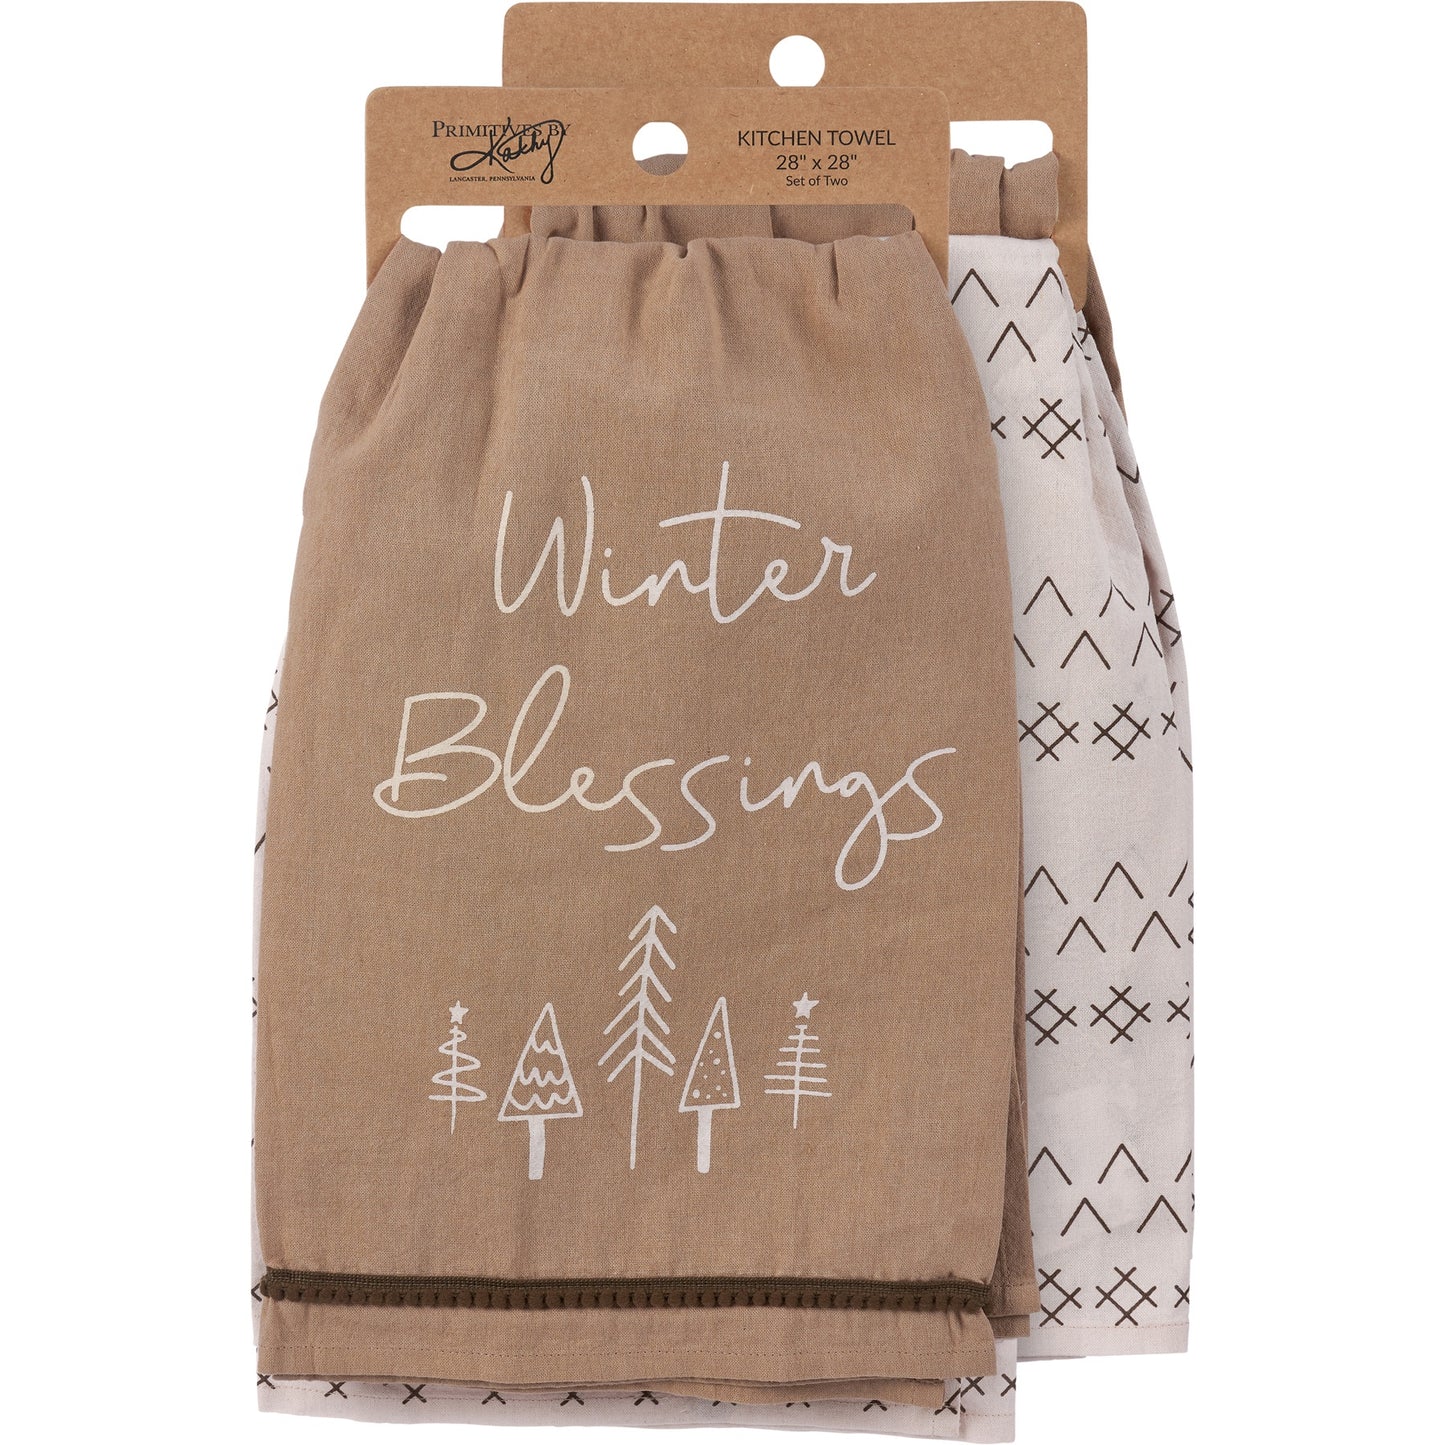 Occasions - Christmas kitchen towels for the queens of cooking! 🙌🏽 • • •  • #luxury #trendy #onlineshop #boutiqueclothing #upscale #womensfashion  #outfit #dresses #shopoccasions #newarrivals #beautiful #online #instastyle  #shopsmall #shoponline #new